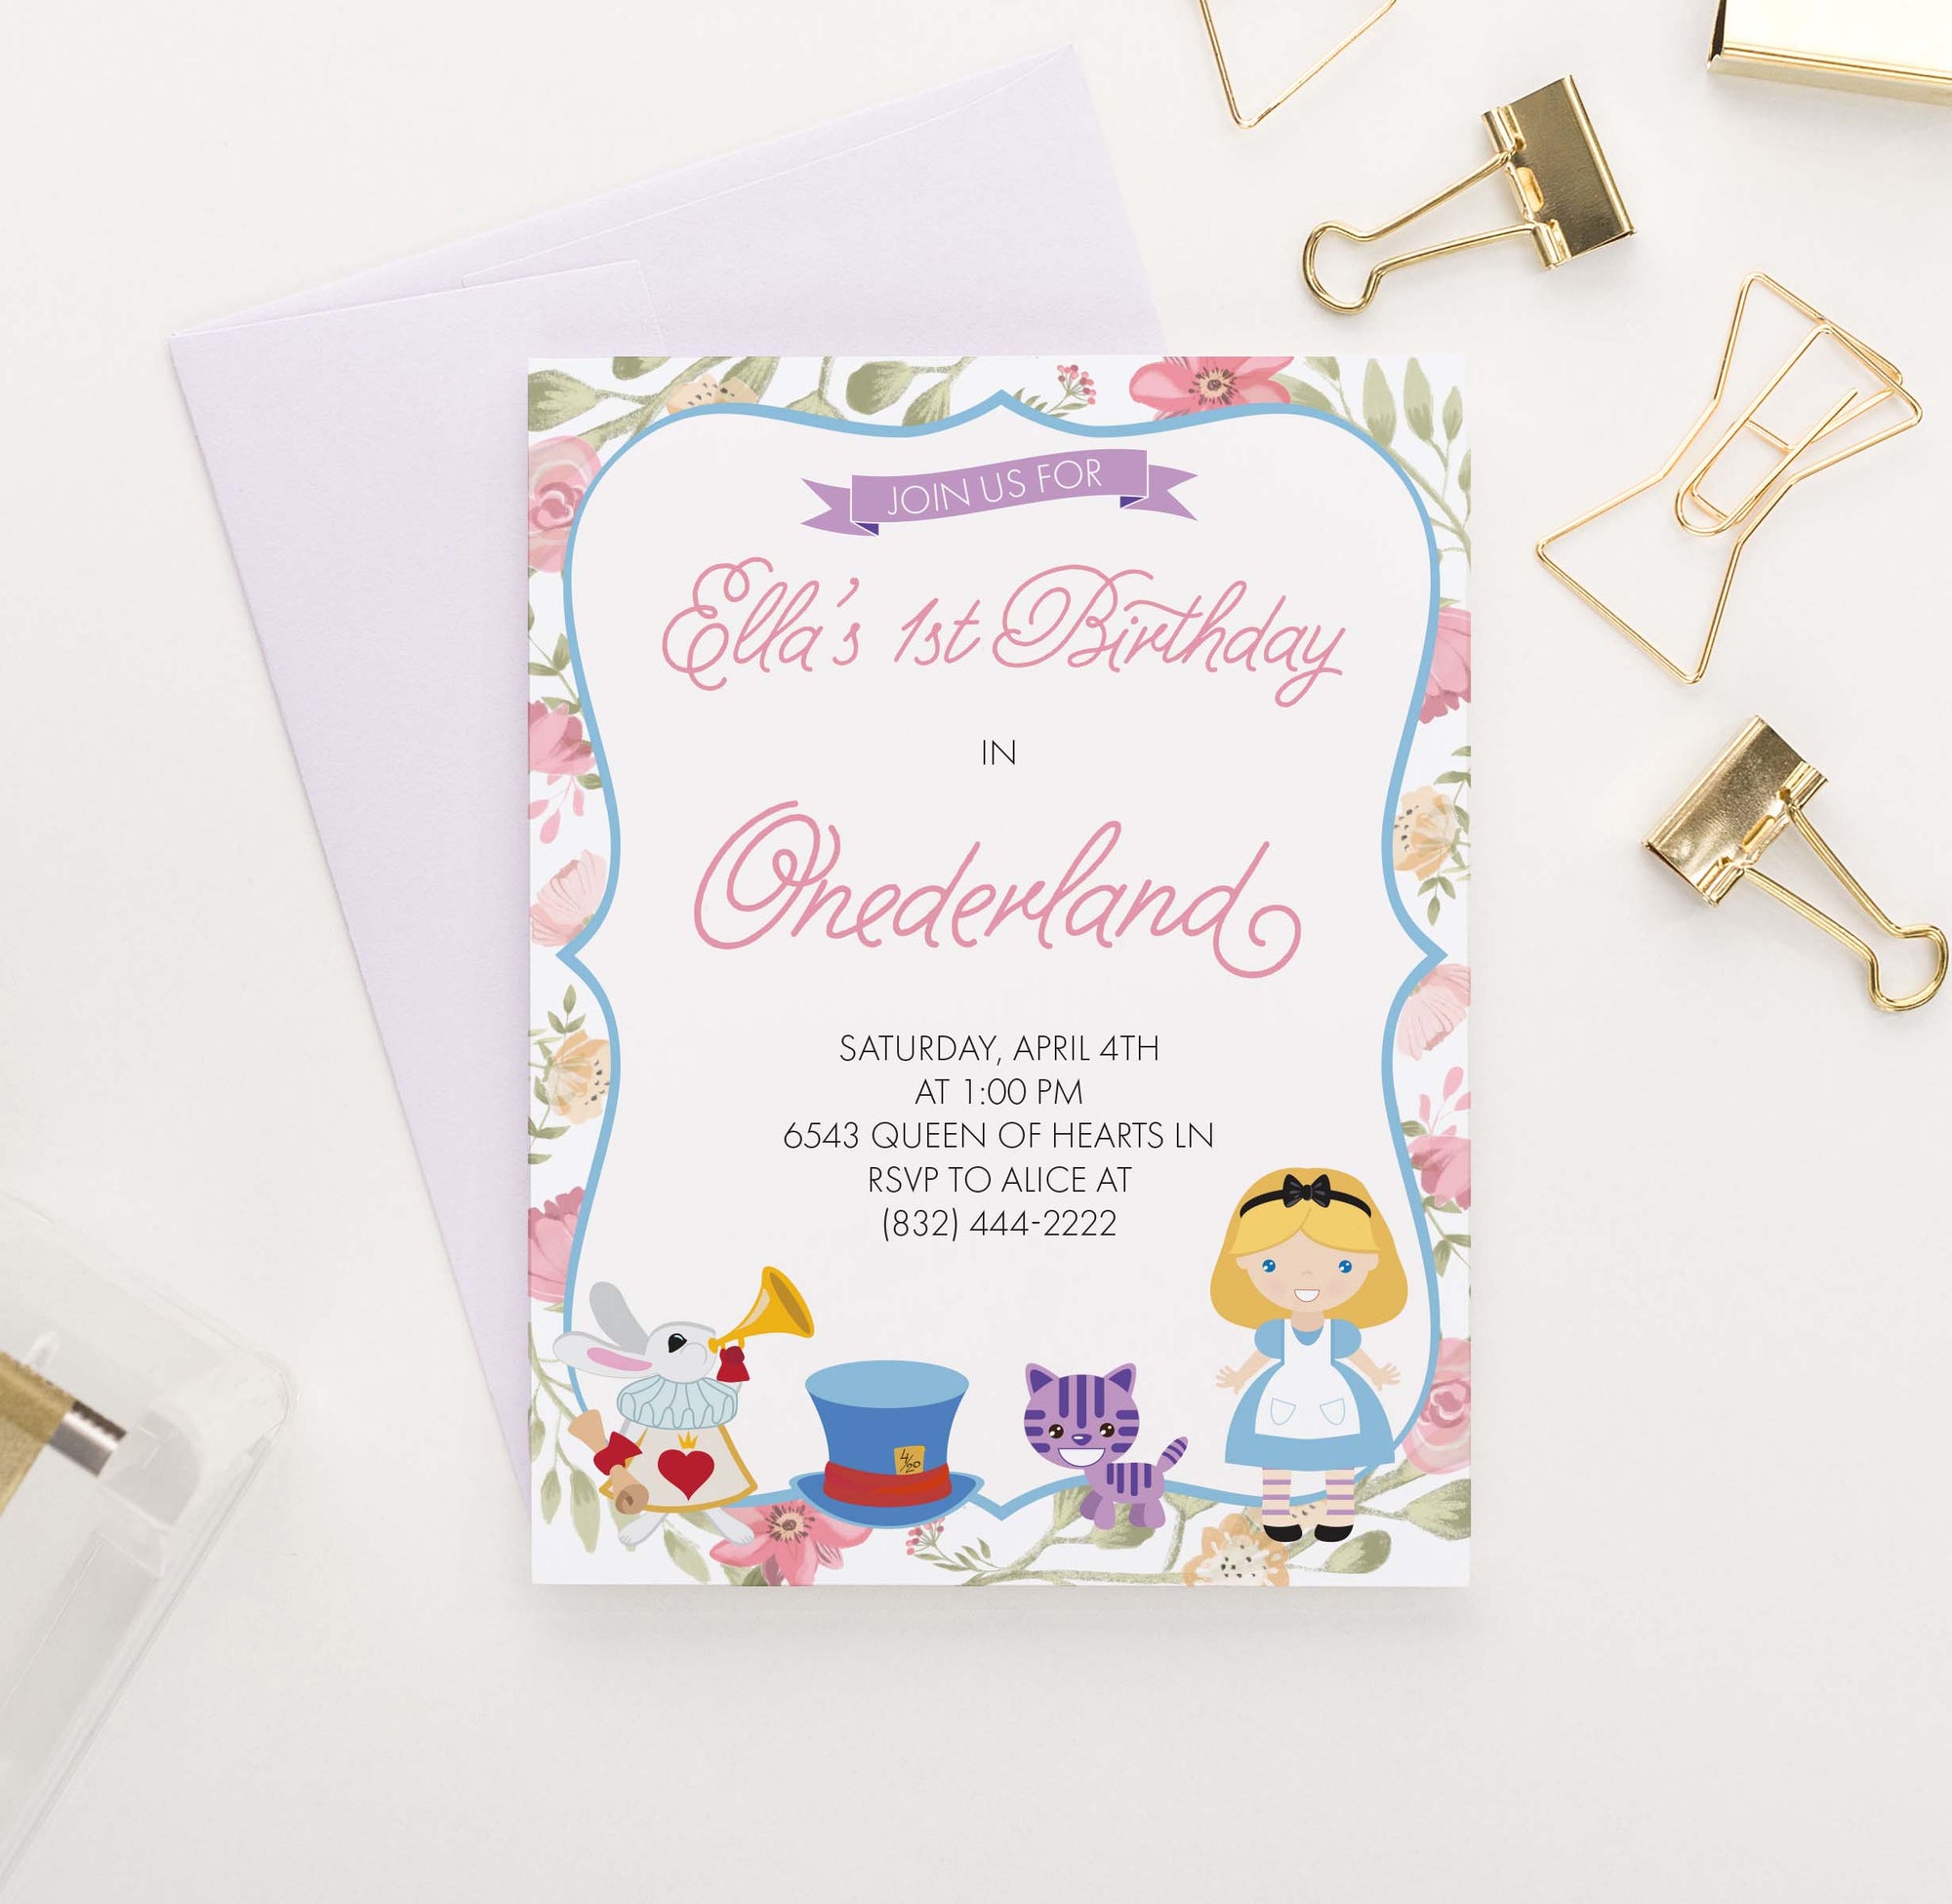 BI043 onederland birthday party invites for girls alice cat tophat